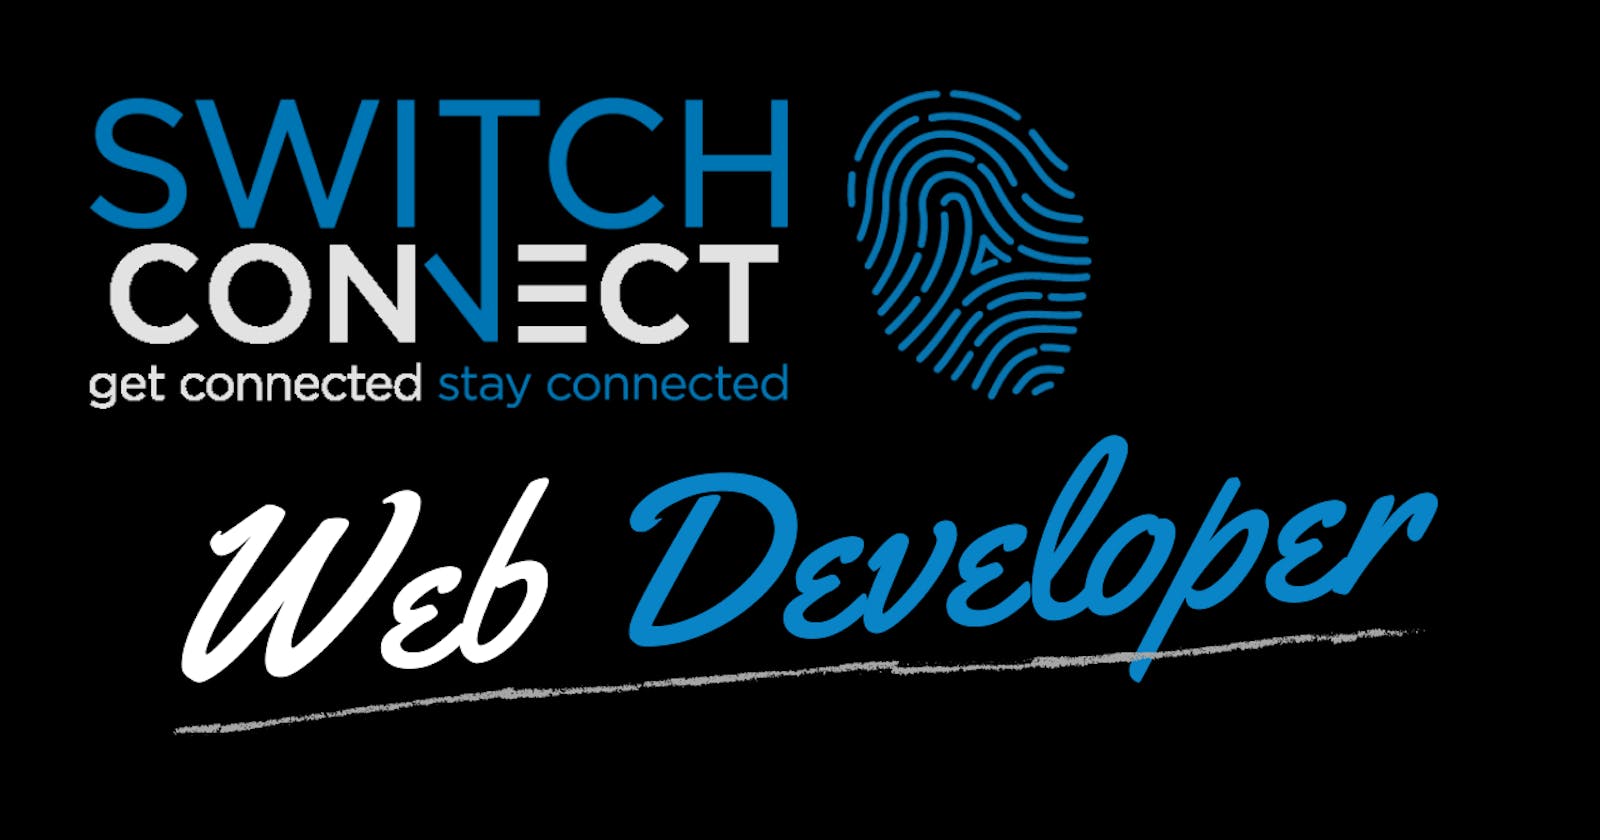 Here at Switch Connect Pty Ltd